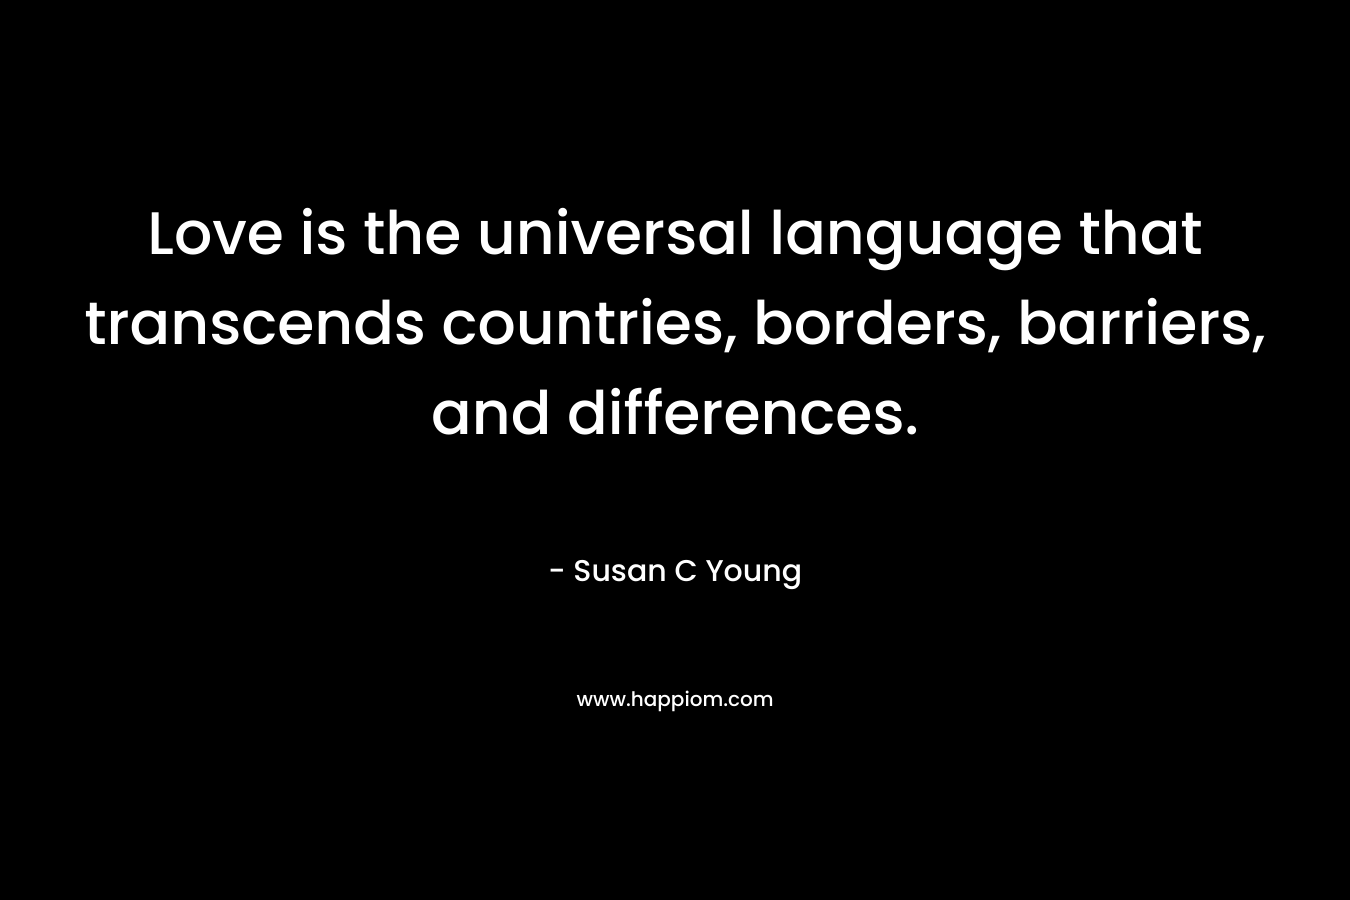 Love is the universal language that transcends countries, borders, barriers, and differences. – Susan C Young